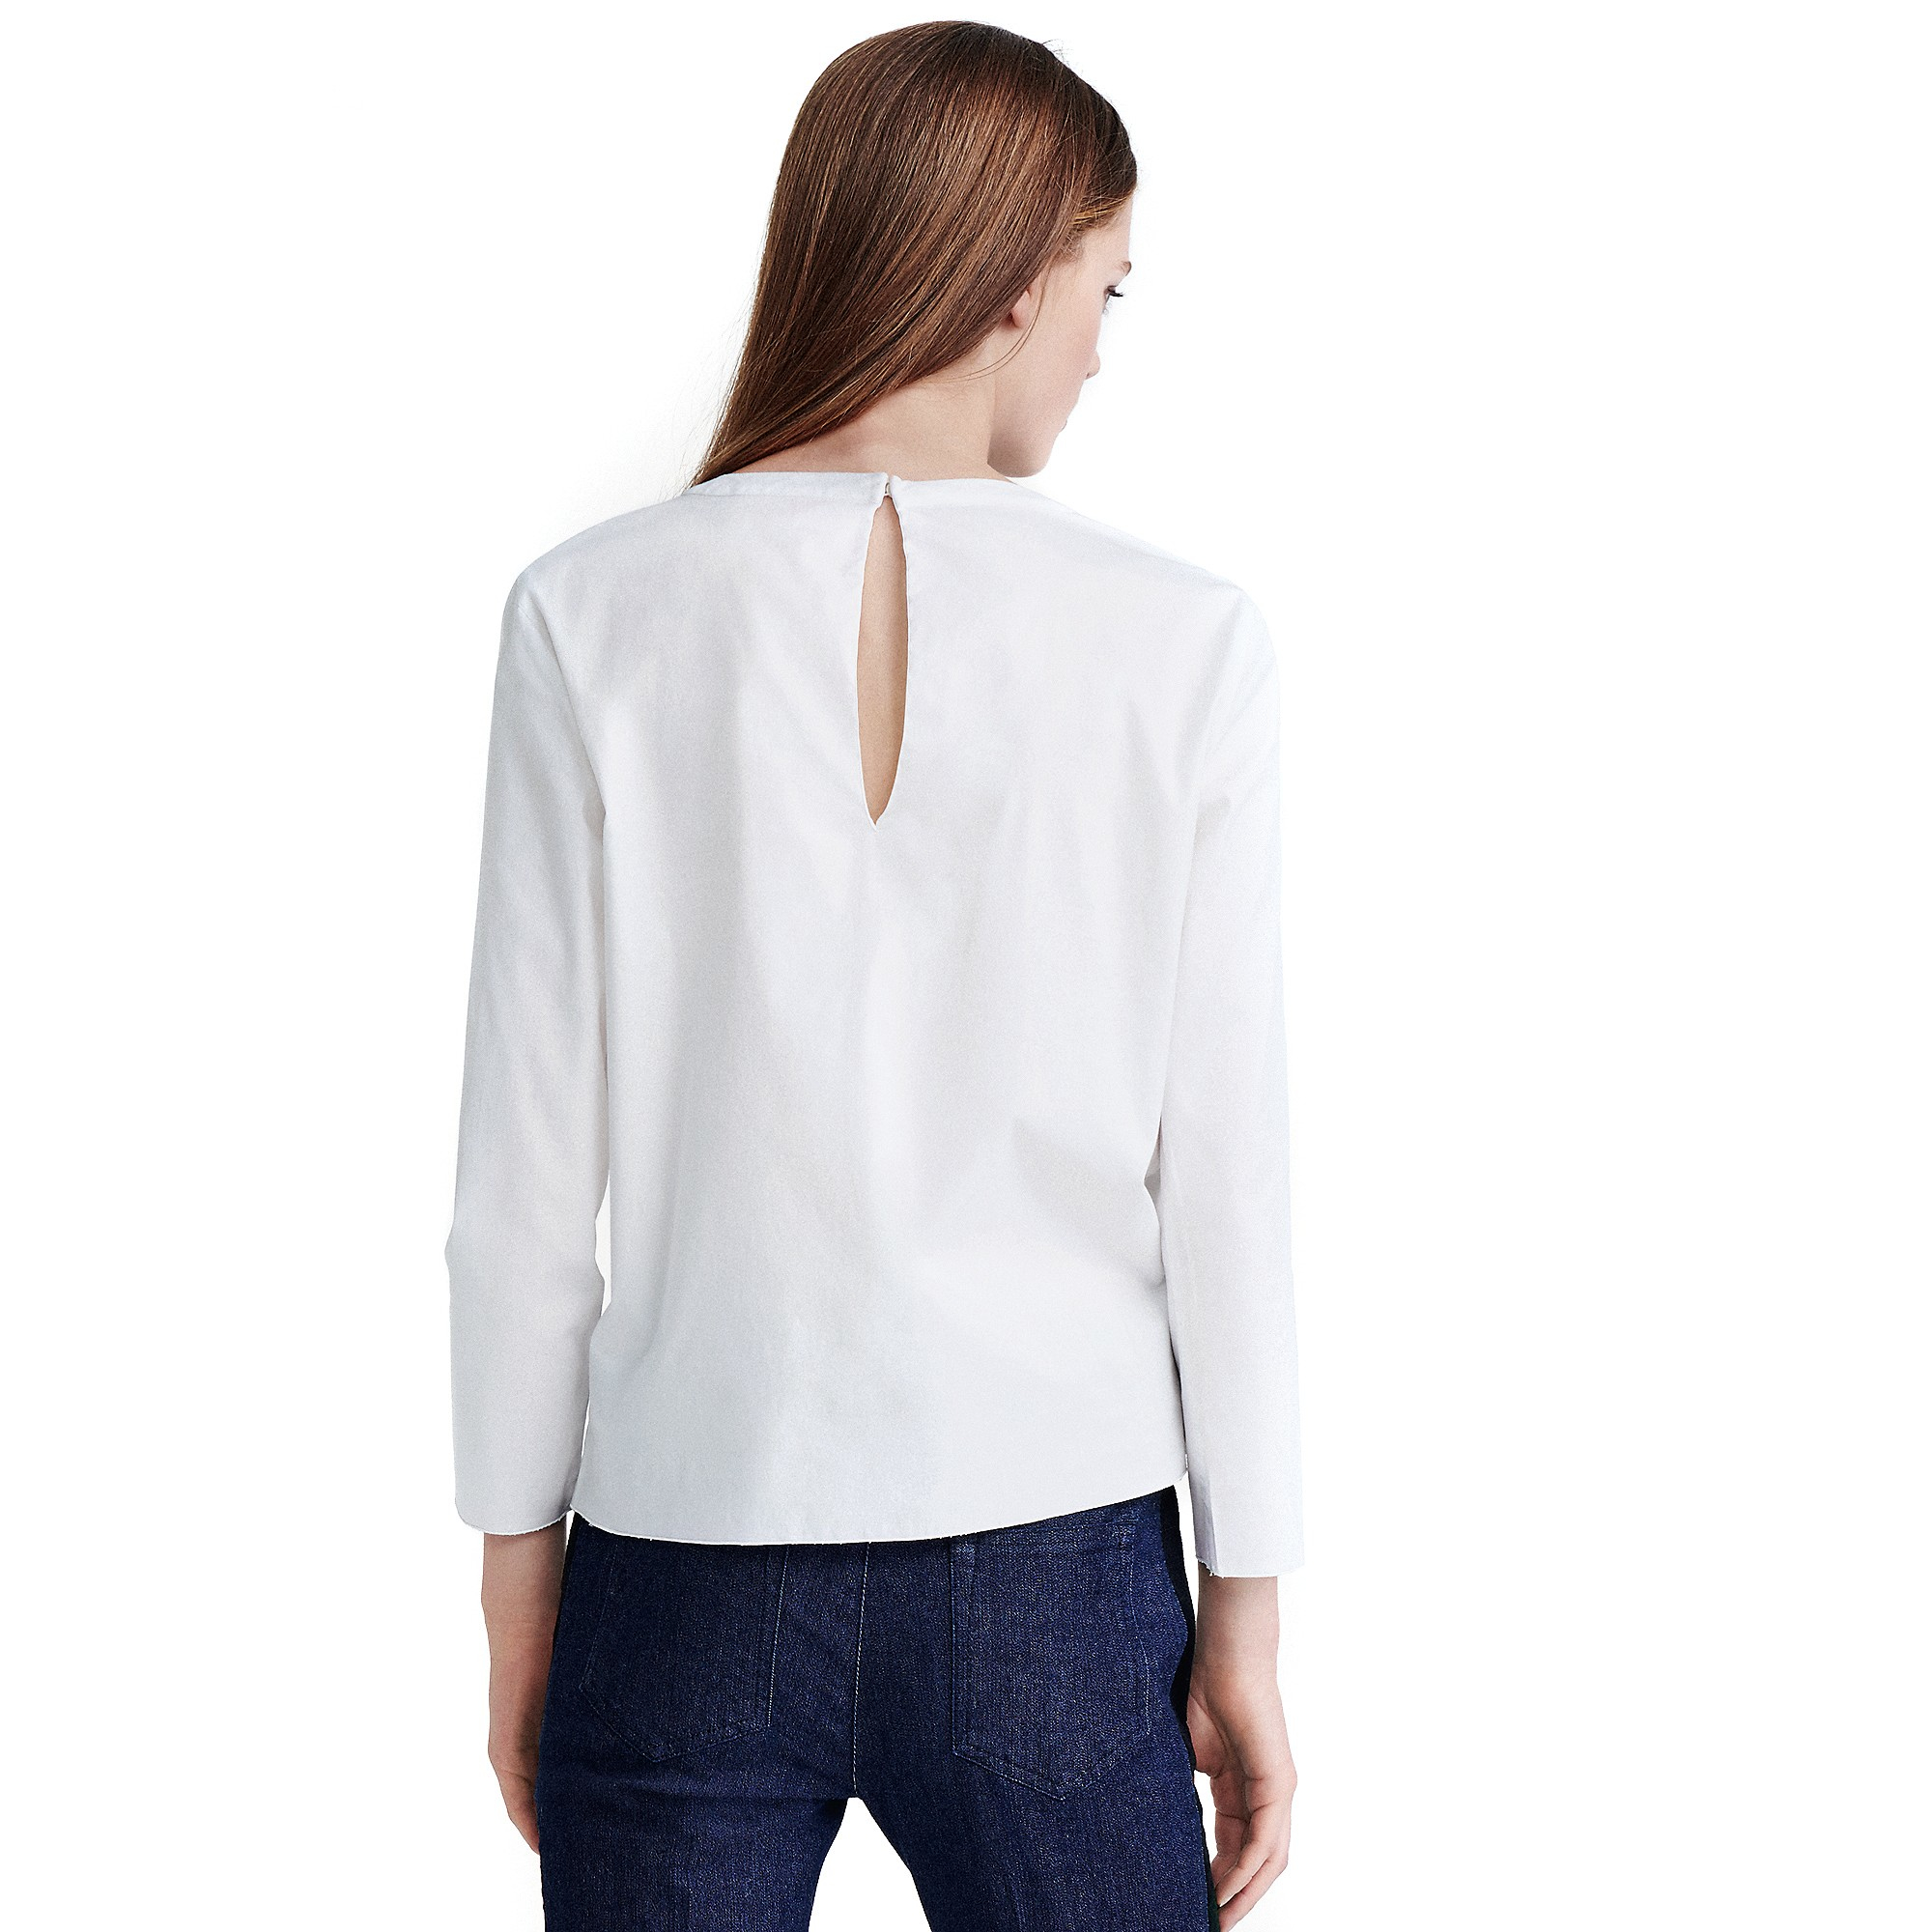 Tommy hilfiger Hilfiger Collection Ruffle Blouse in White (CLASSIC WHITE)